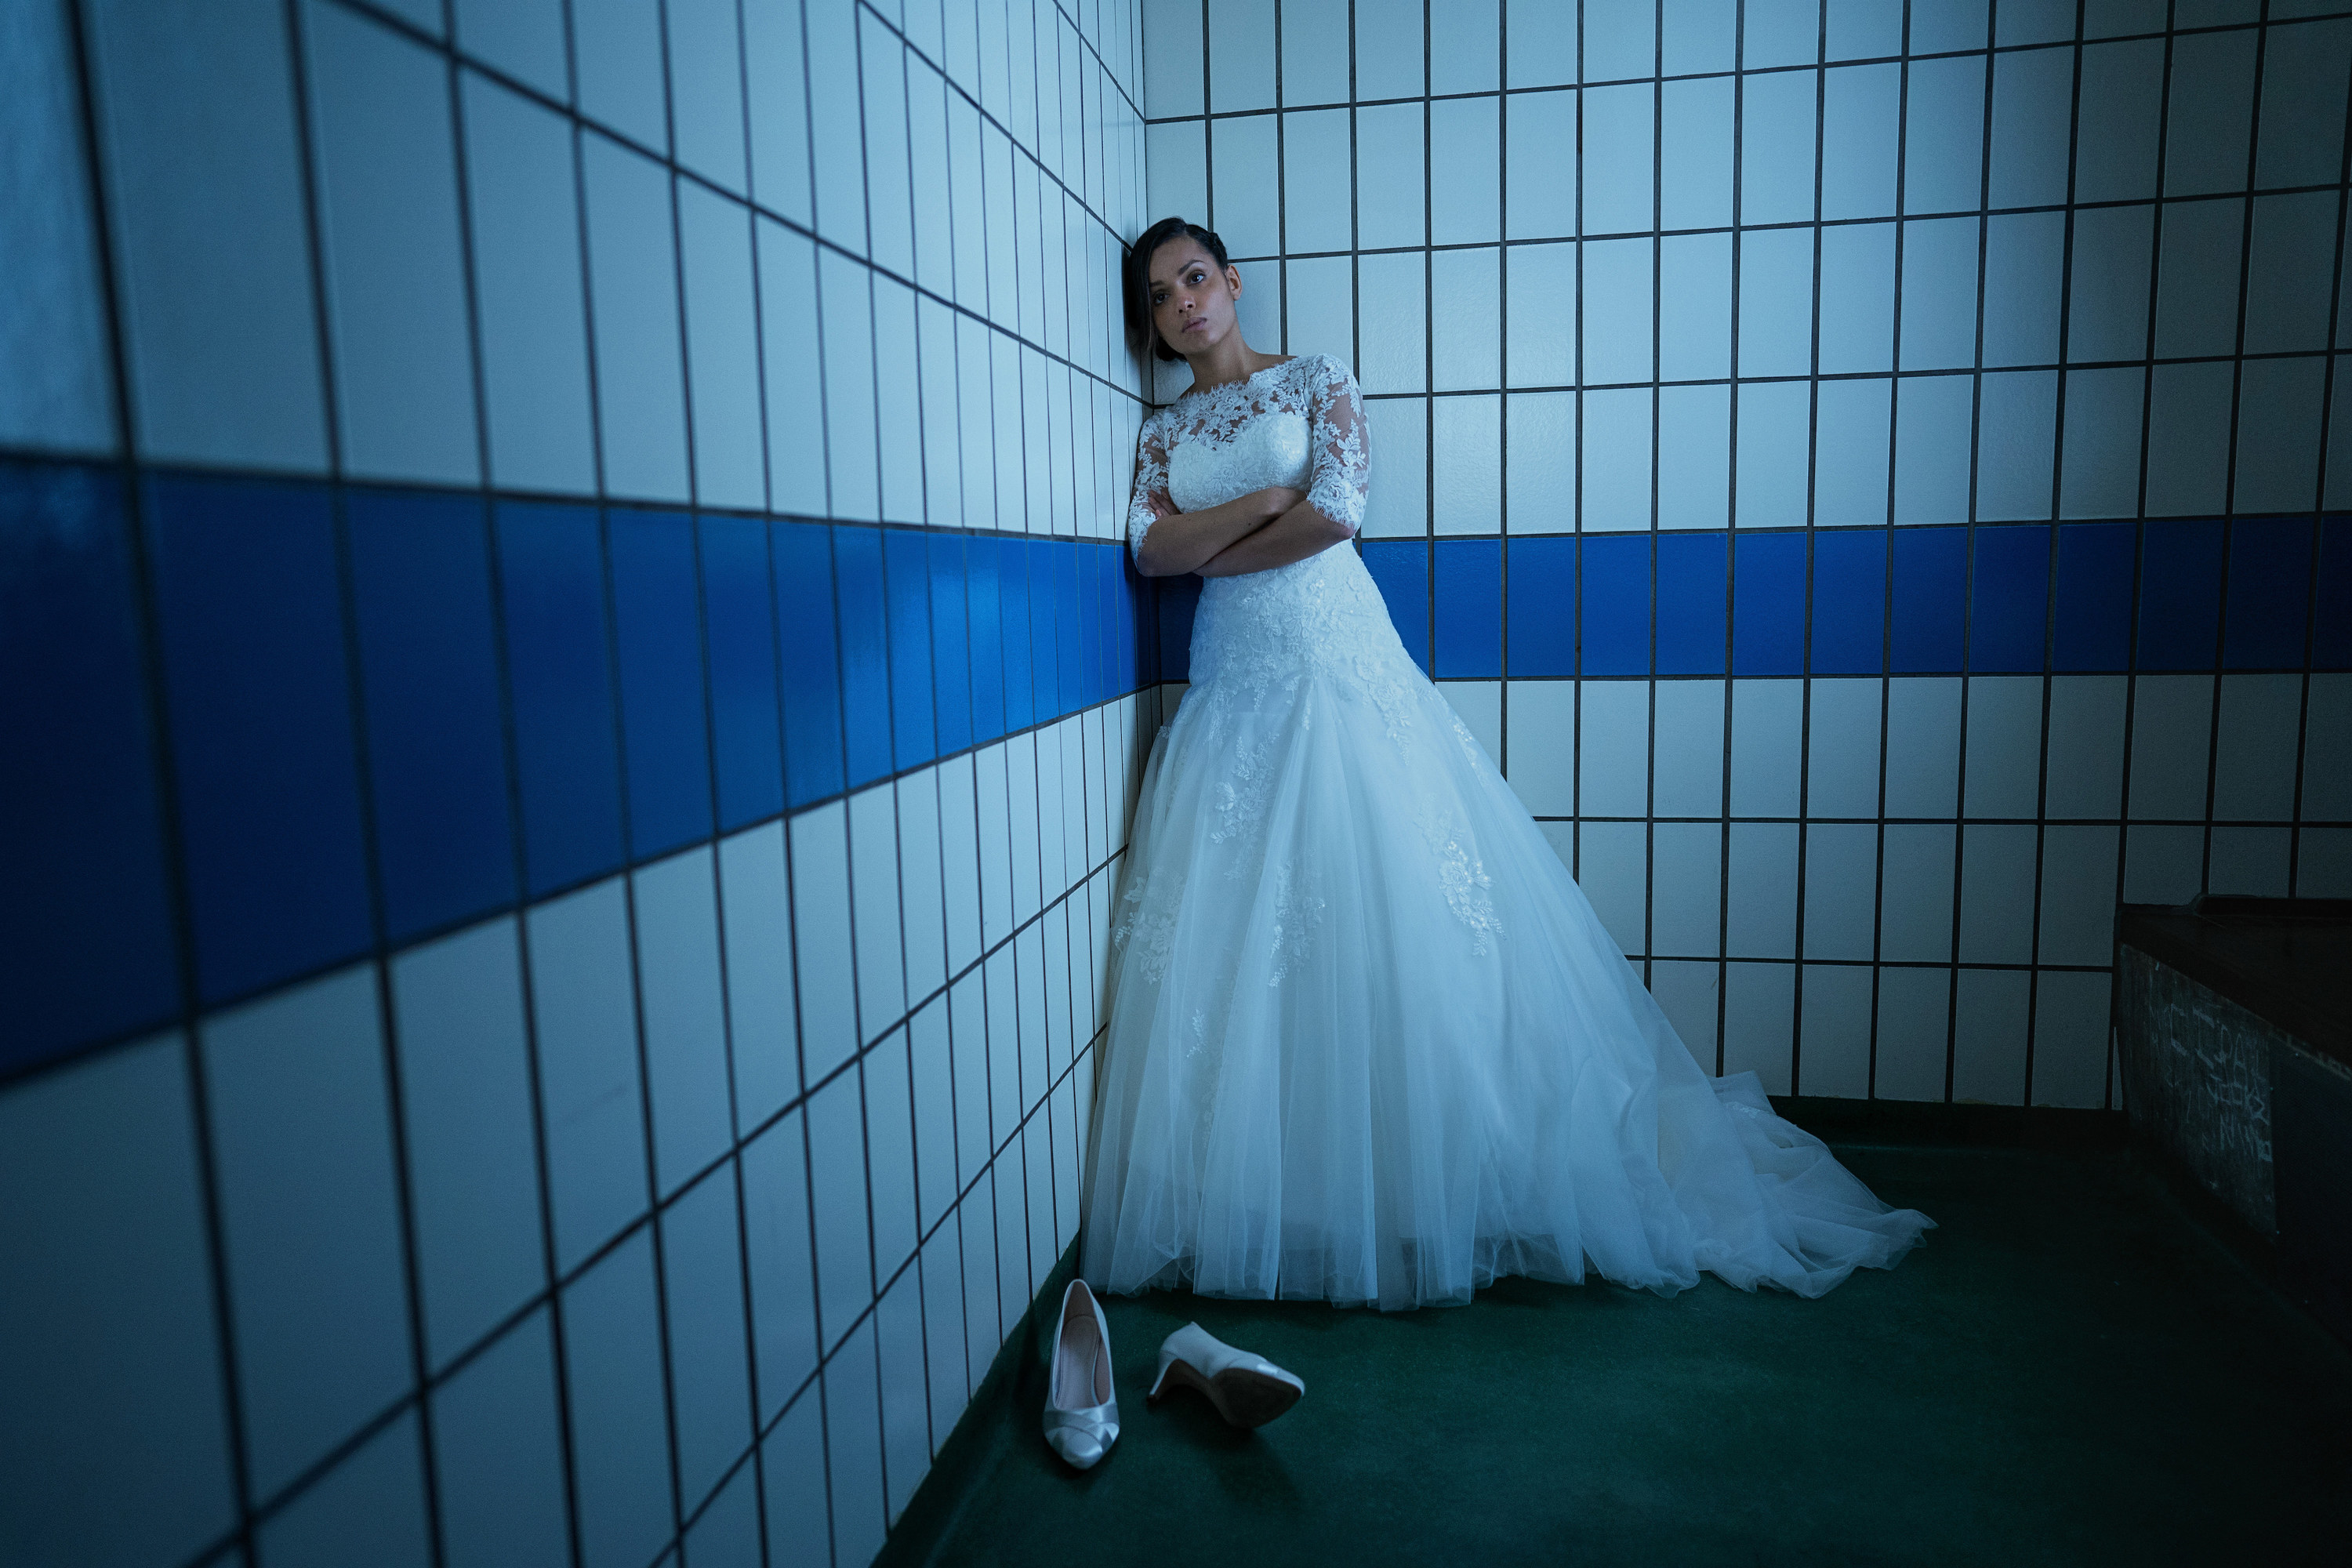 Georgina Campbell stands in a jail cell in her wedding dress